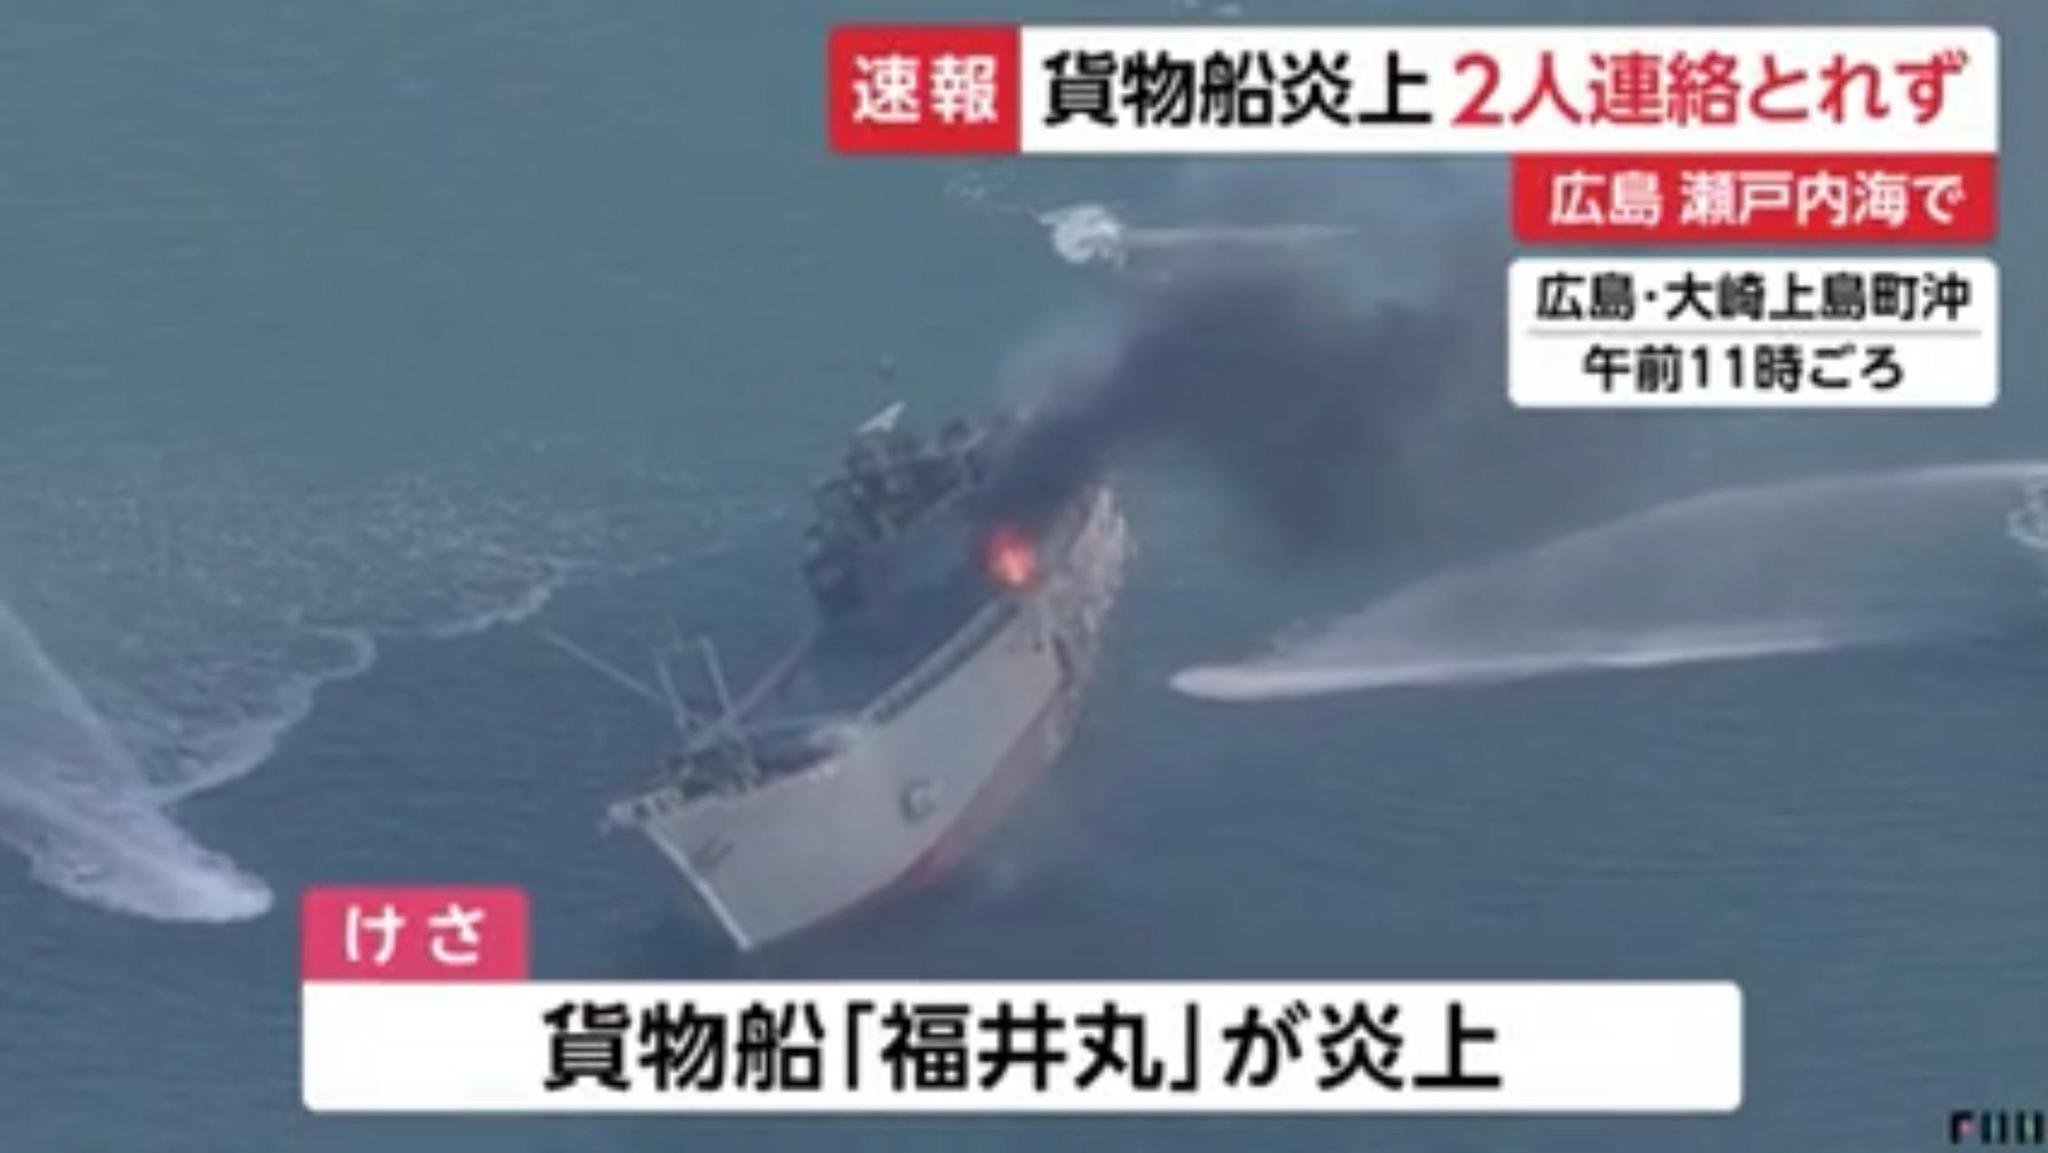 A cargo ship caught fire off the coast of Hiroshima, Japan. Two people on board lost contact.